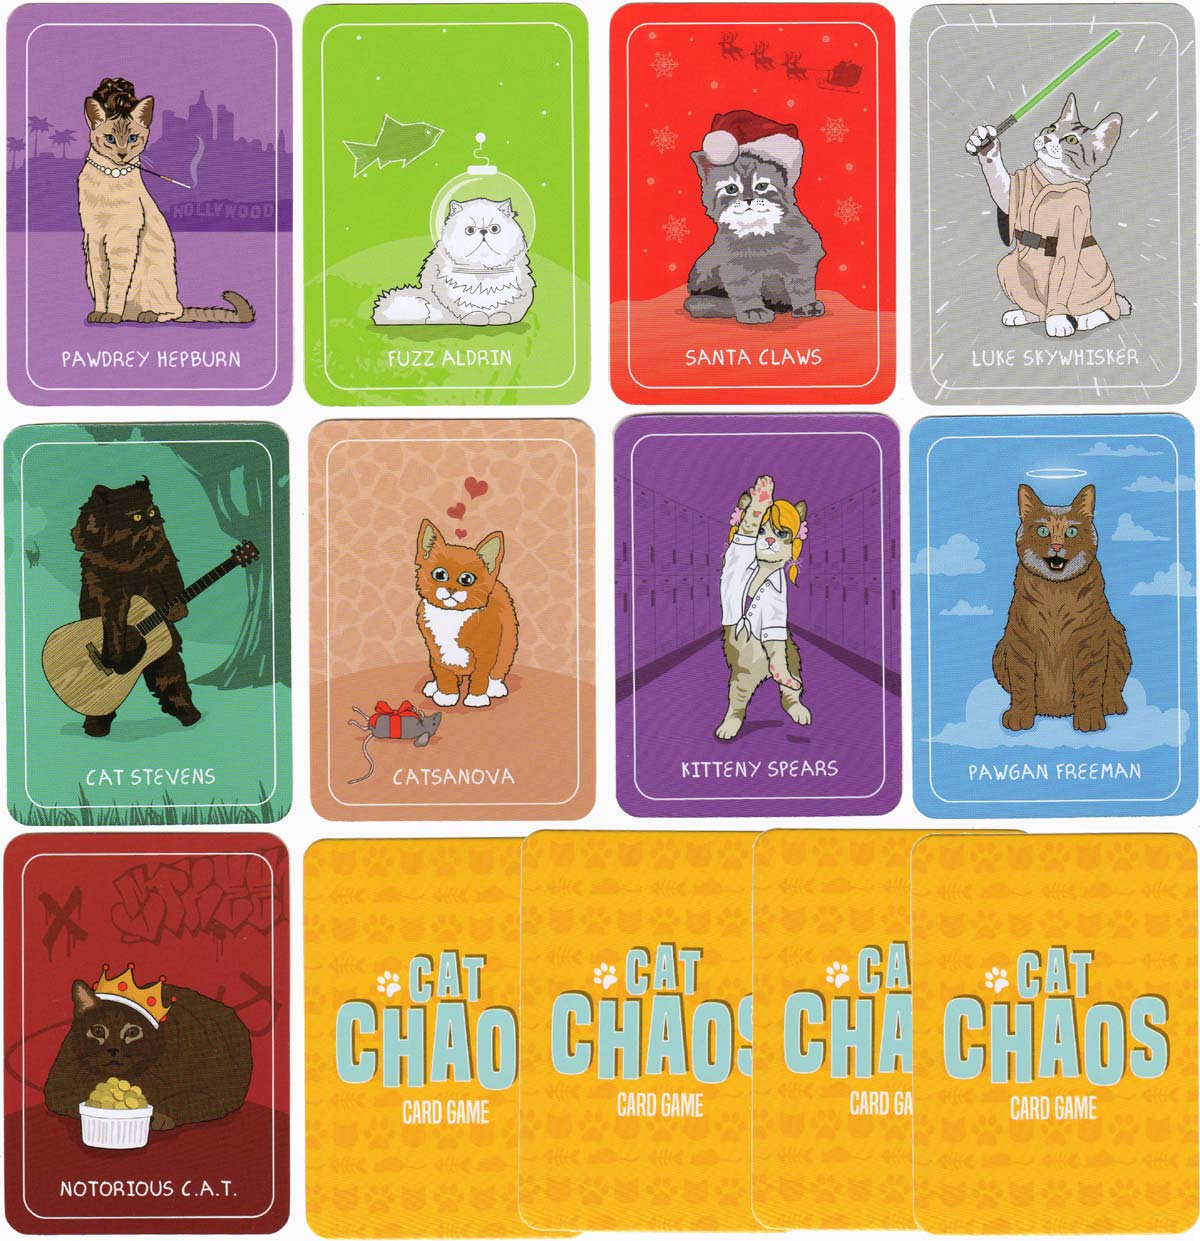 Cat Chaos Card Game - Unique Gifts - Ginger Fox — Perpetual Kid